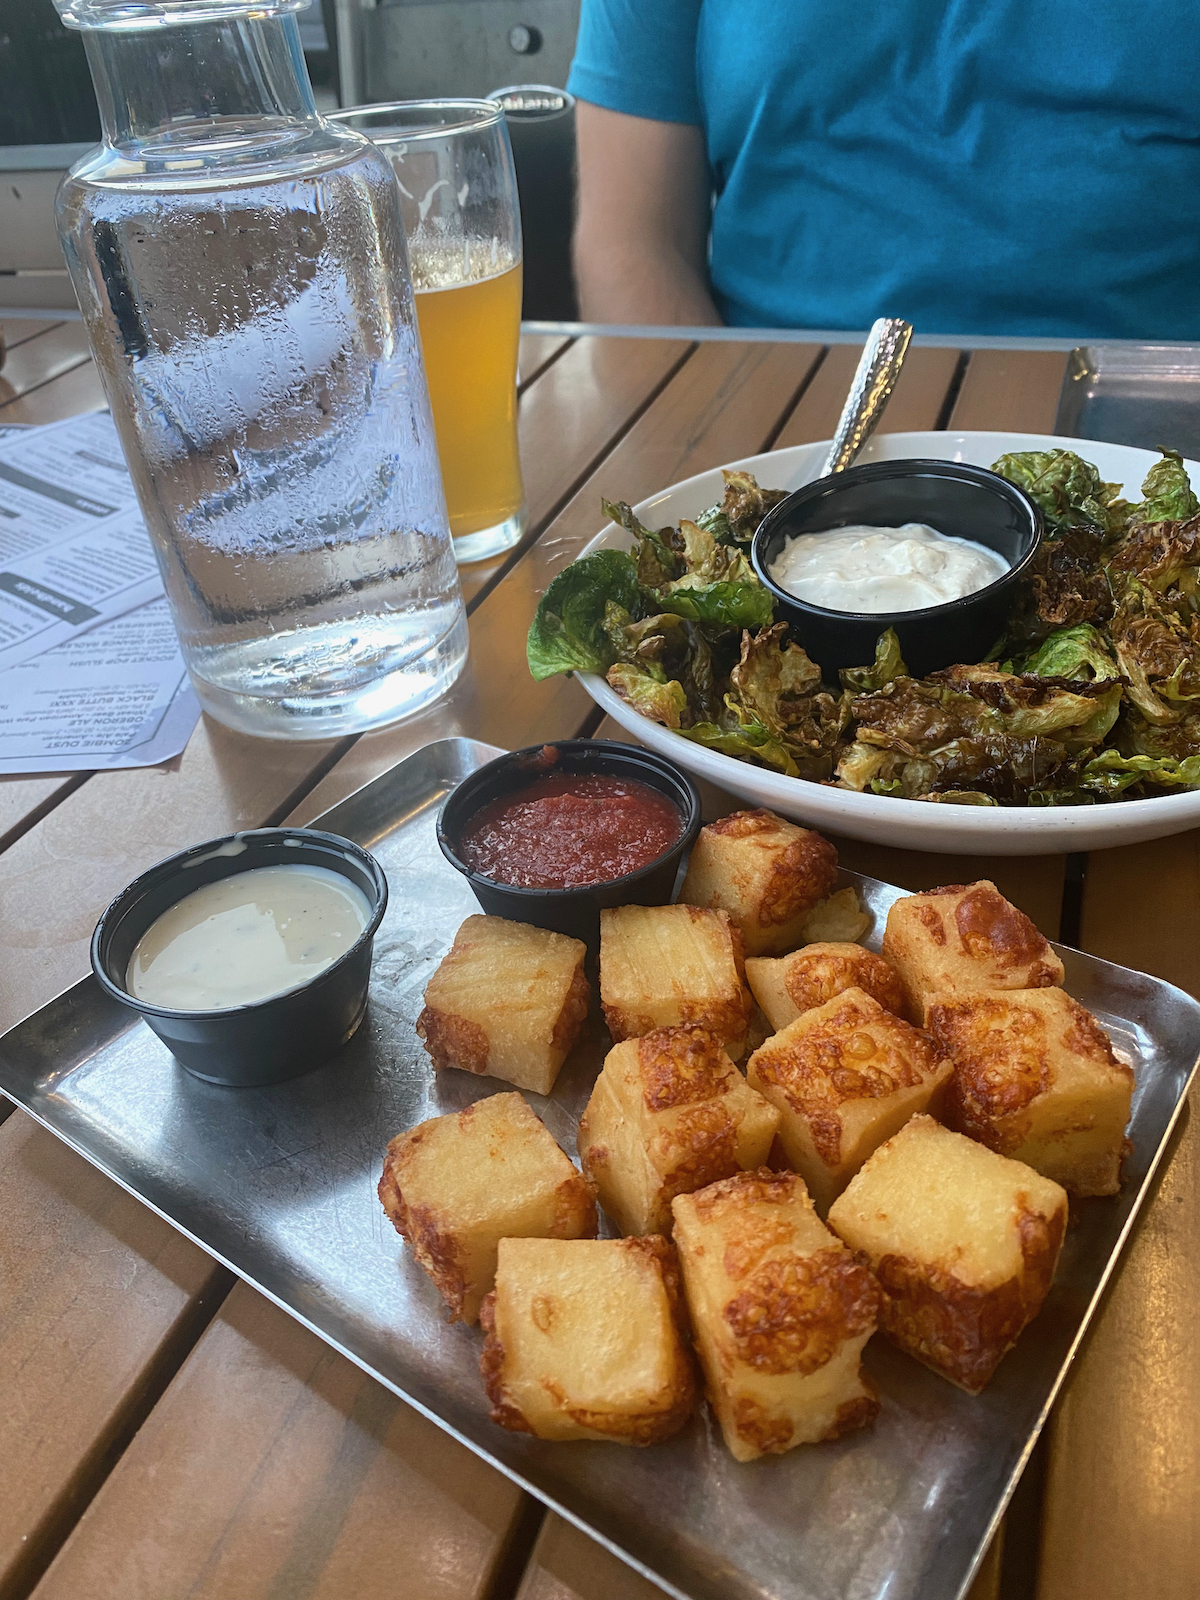 Fried cheese curds and Brussels sprouts at drafthouse in Janesville, Wisconsin